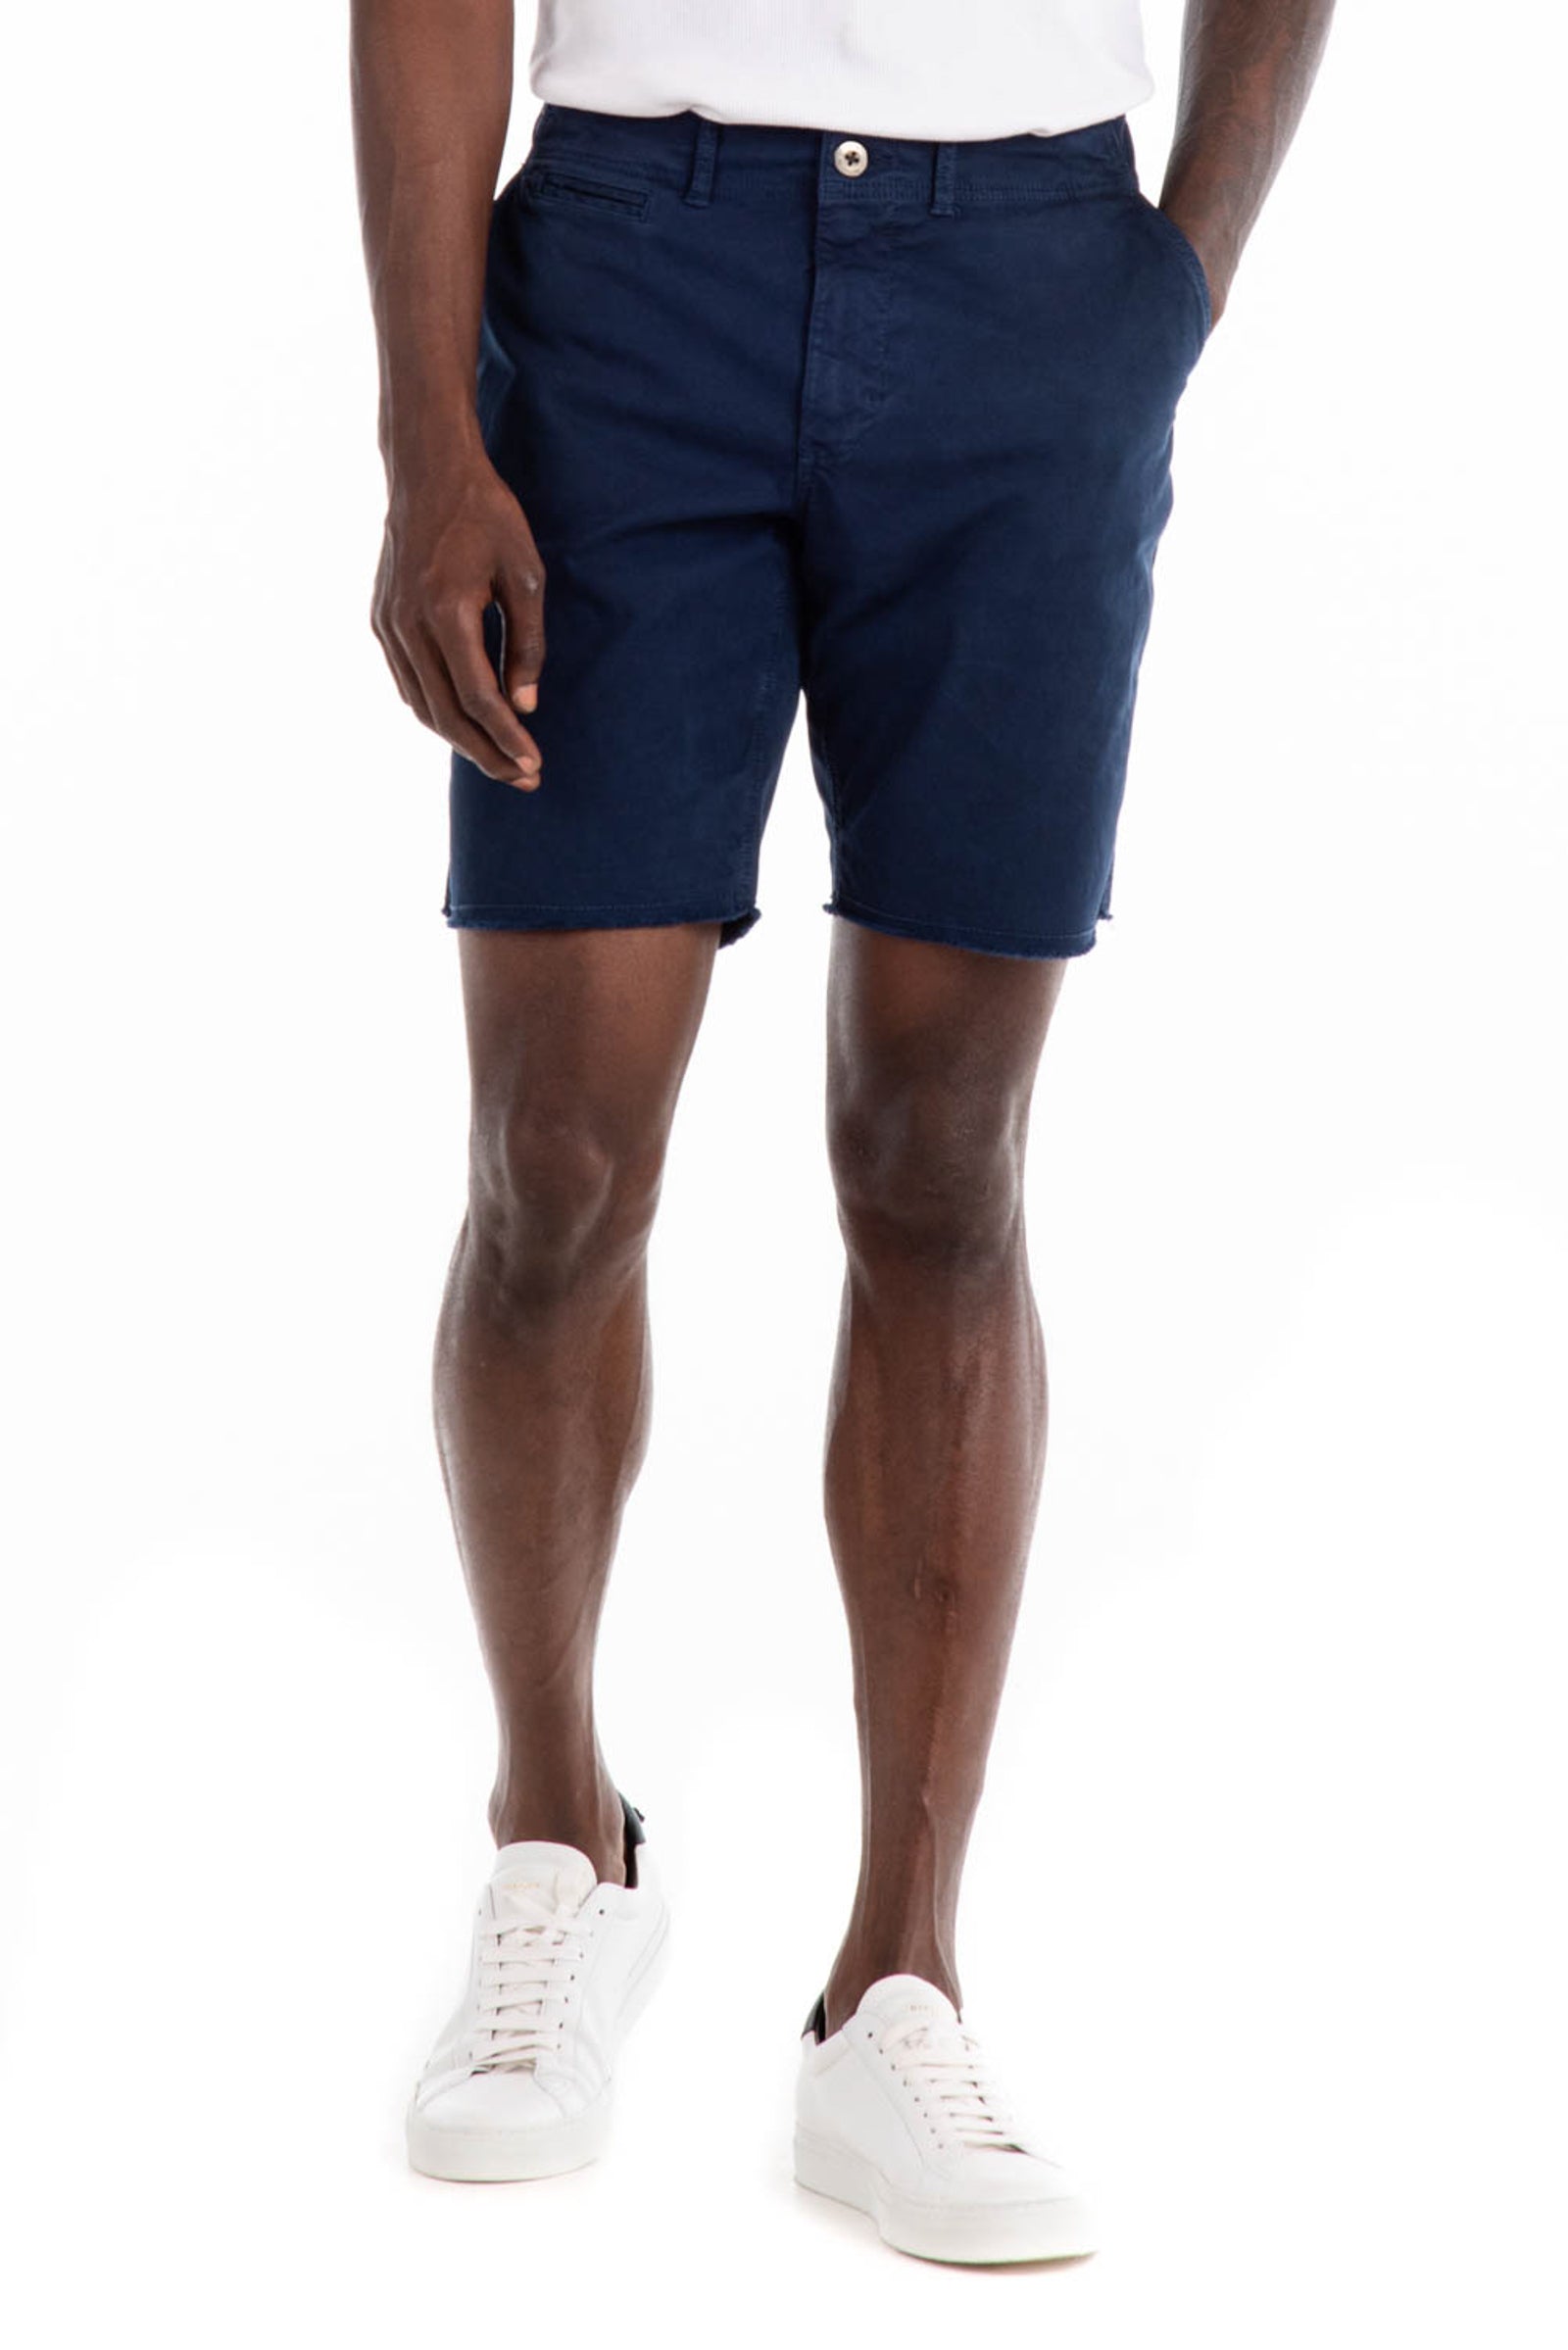 Original Paperbacks Brentwood Chino Short in Navy on Model Cropped Styled View